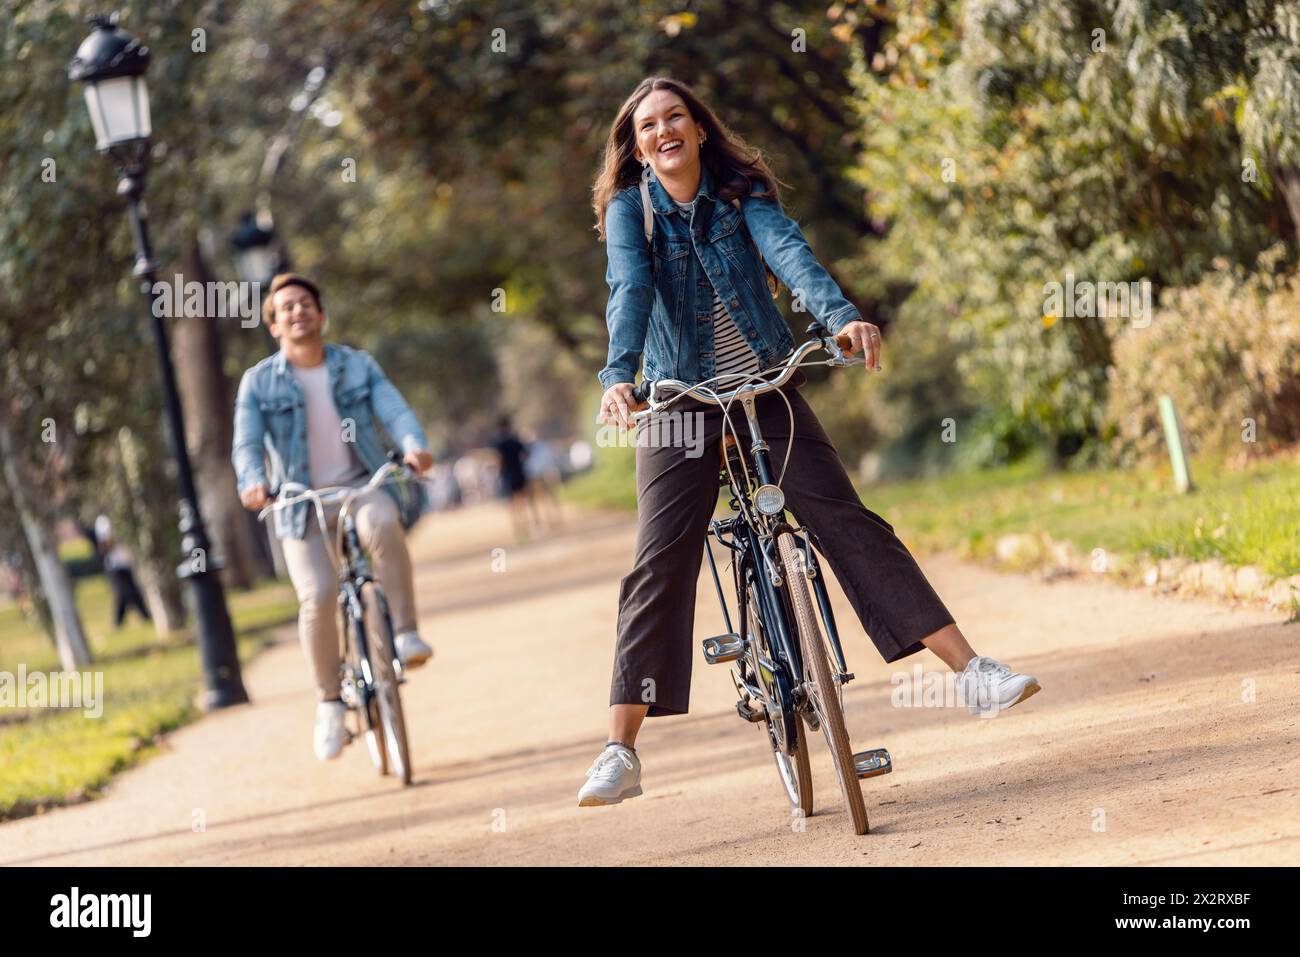 Carefree woman cycling with boyfriend at park Stock Photo